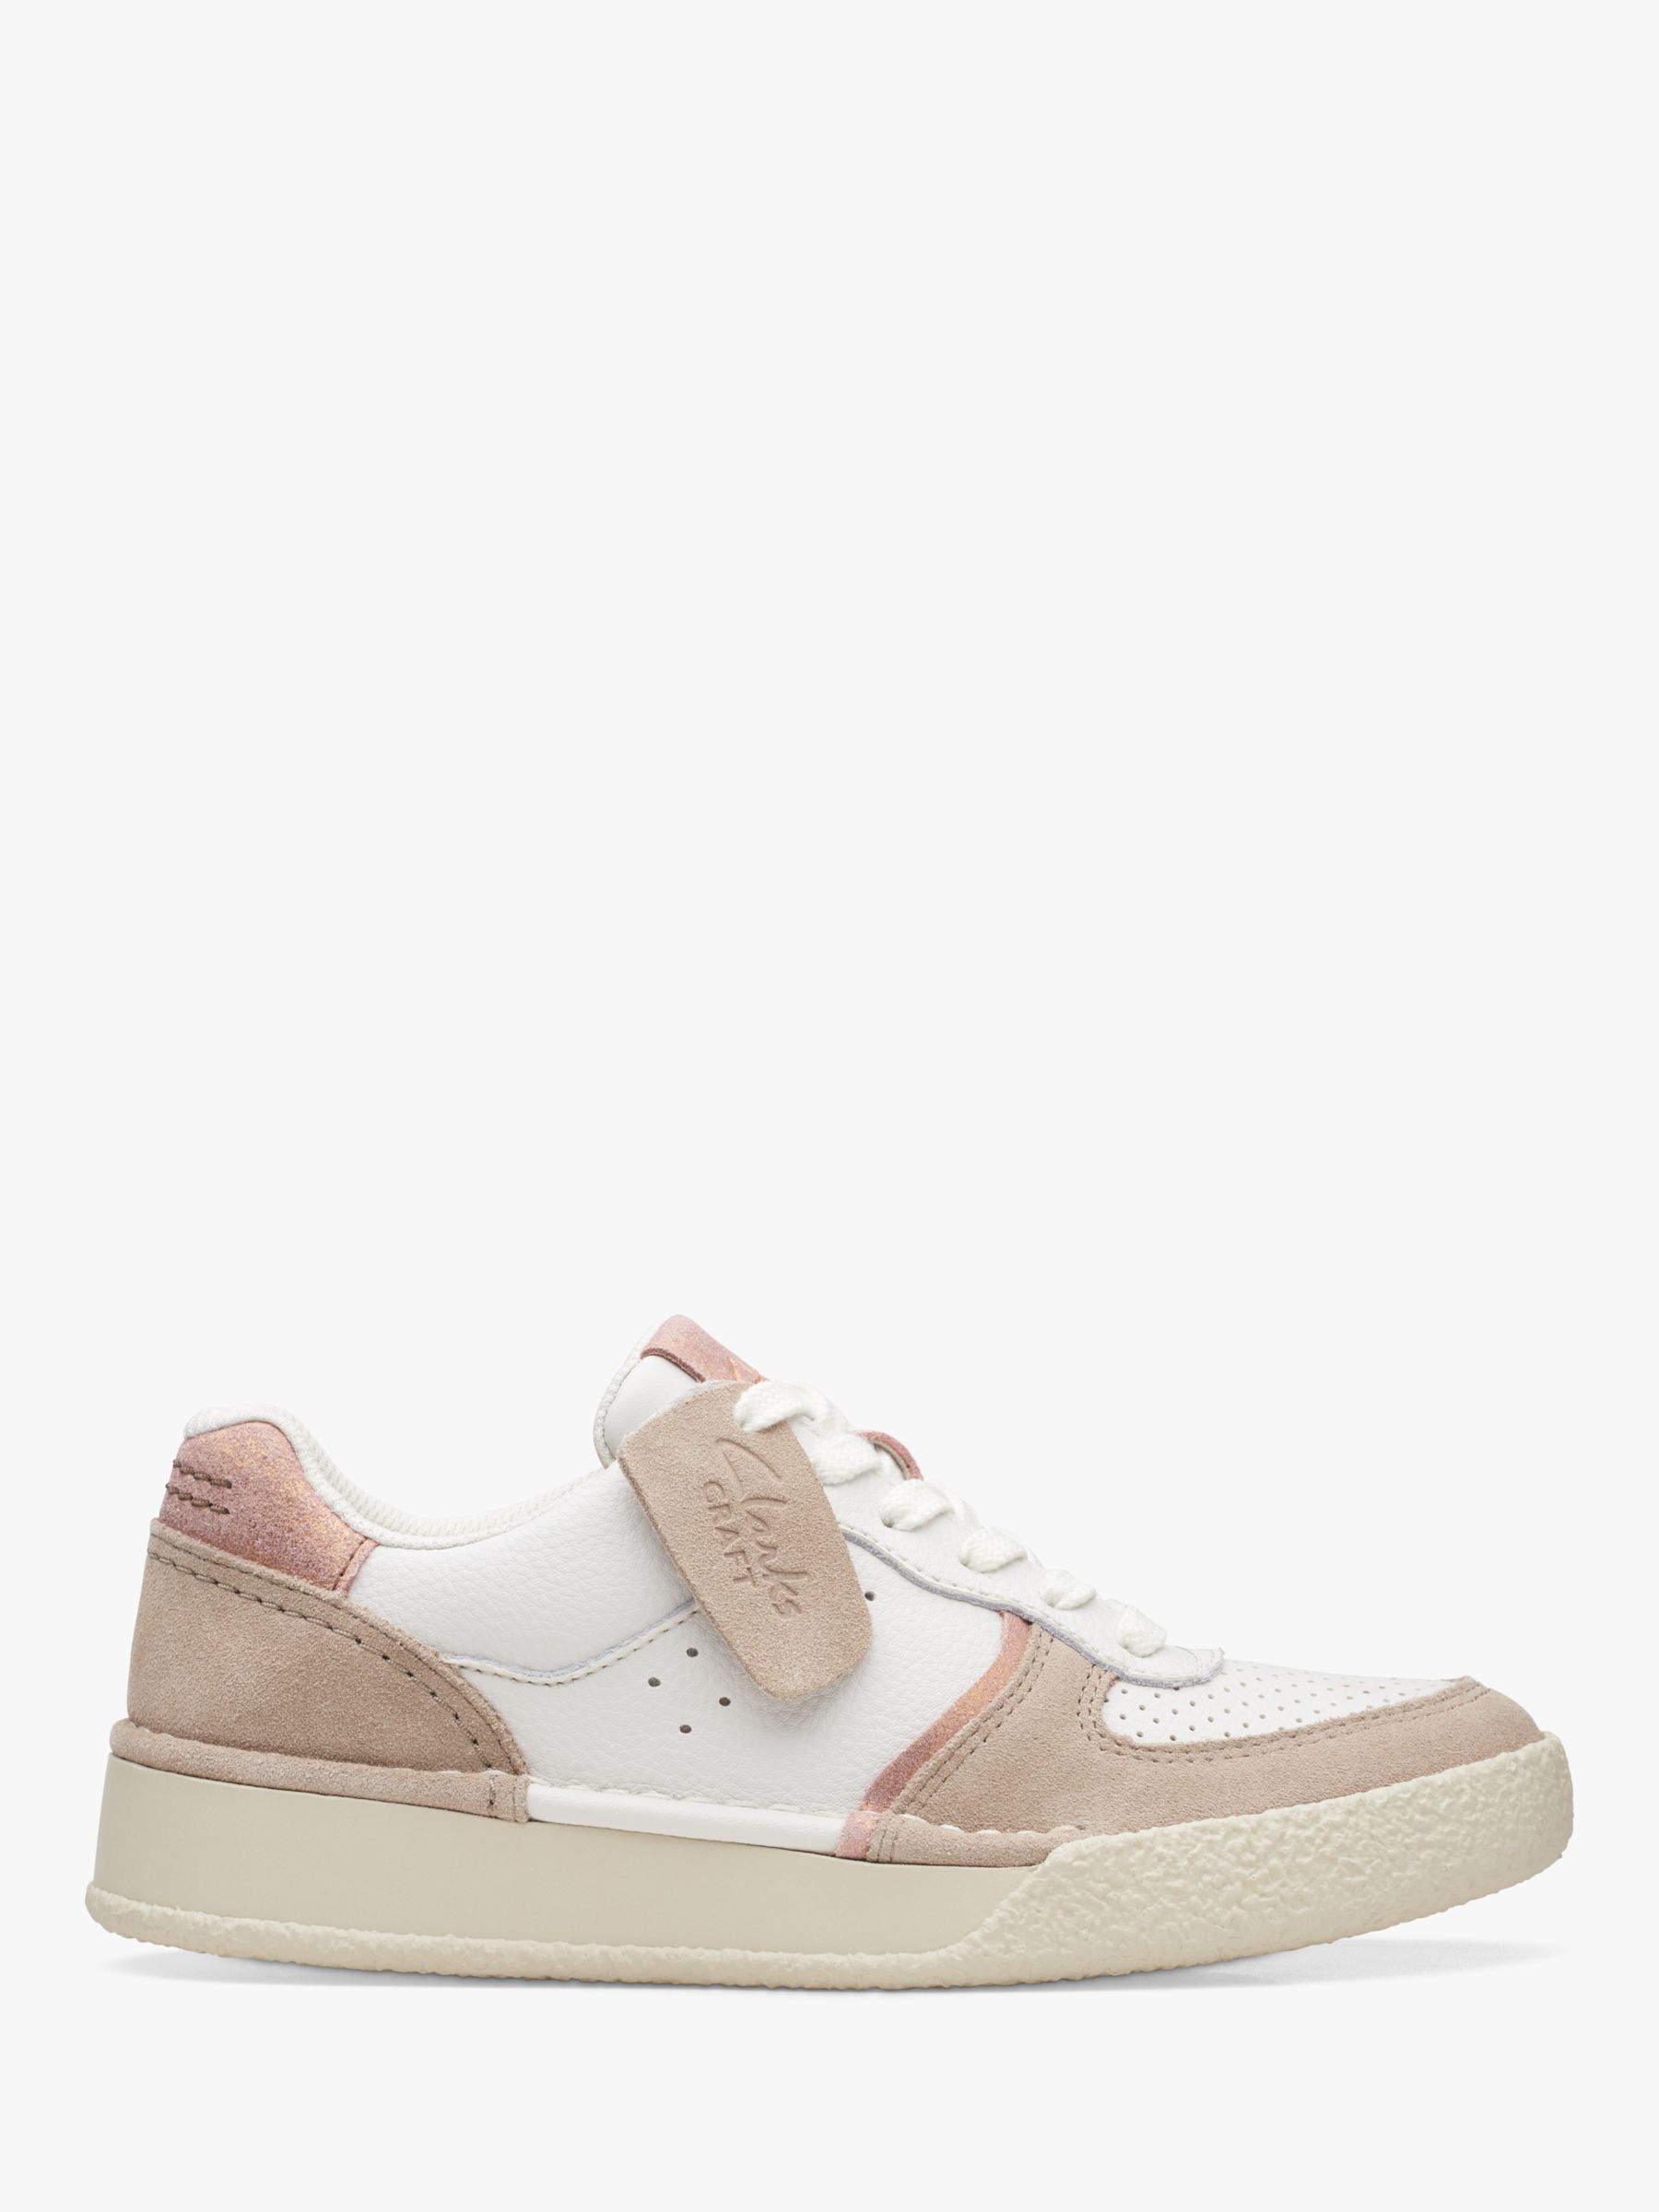 Clarks Craft Cup Court Trainers, Sand at John Lewis & Partners